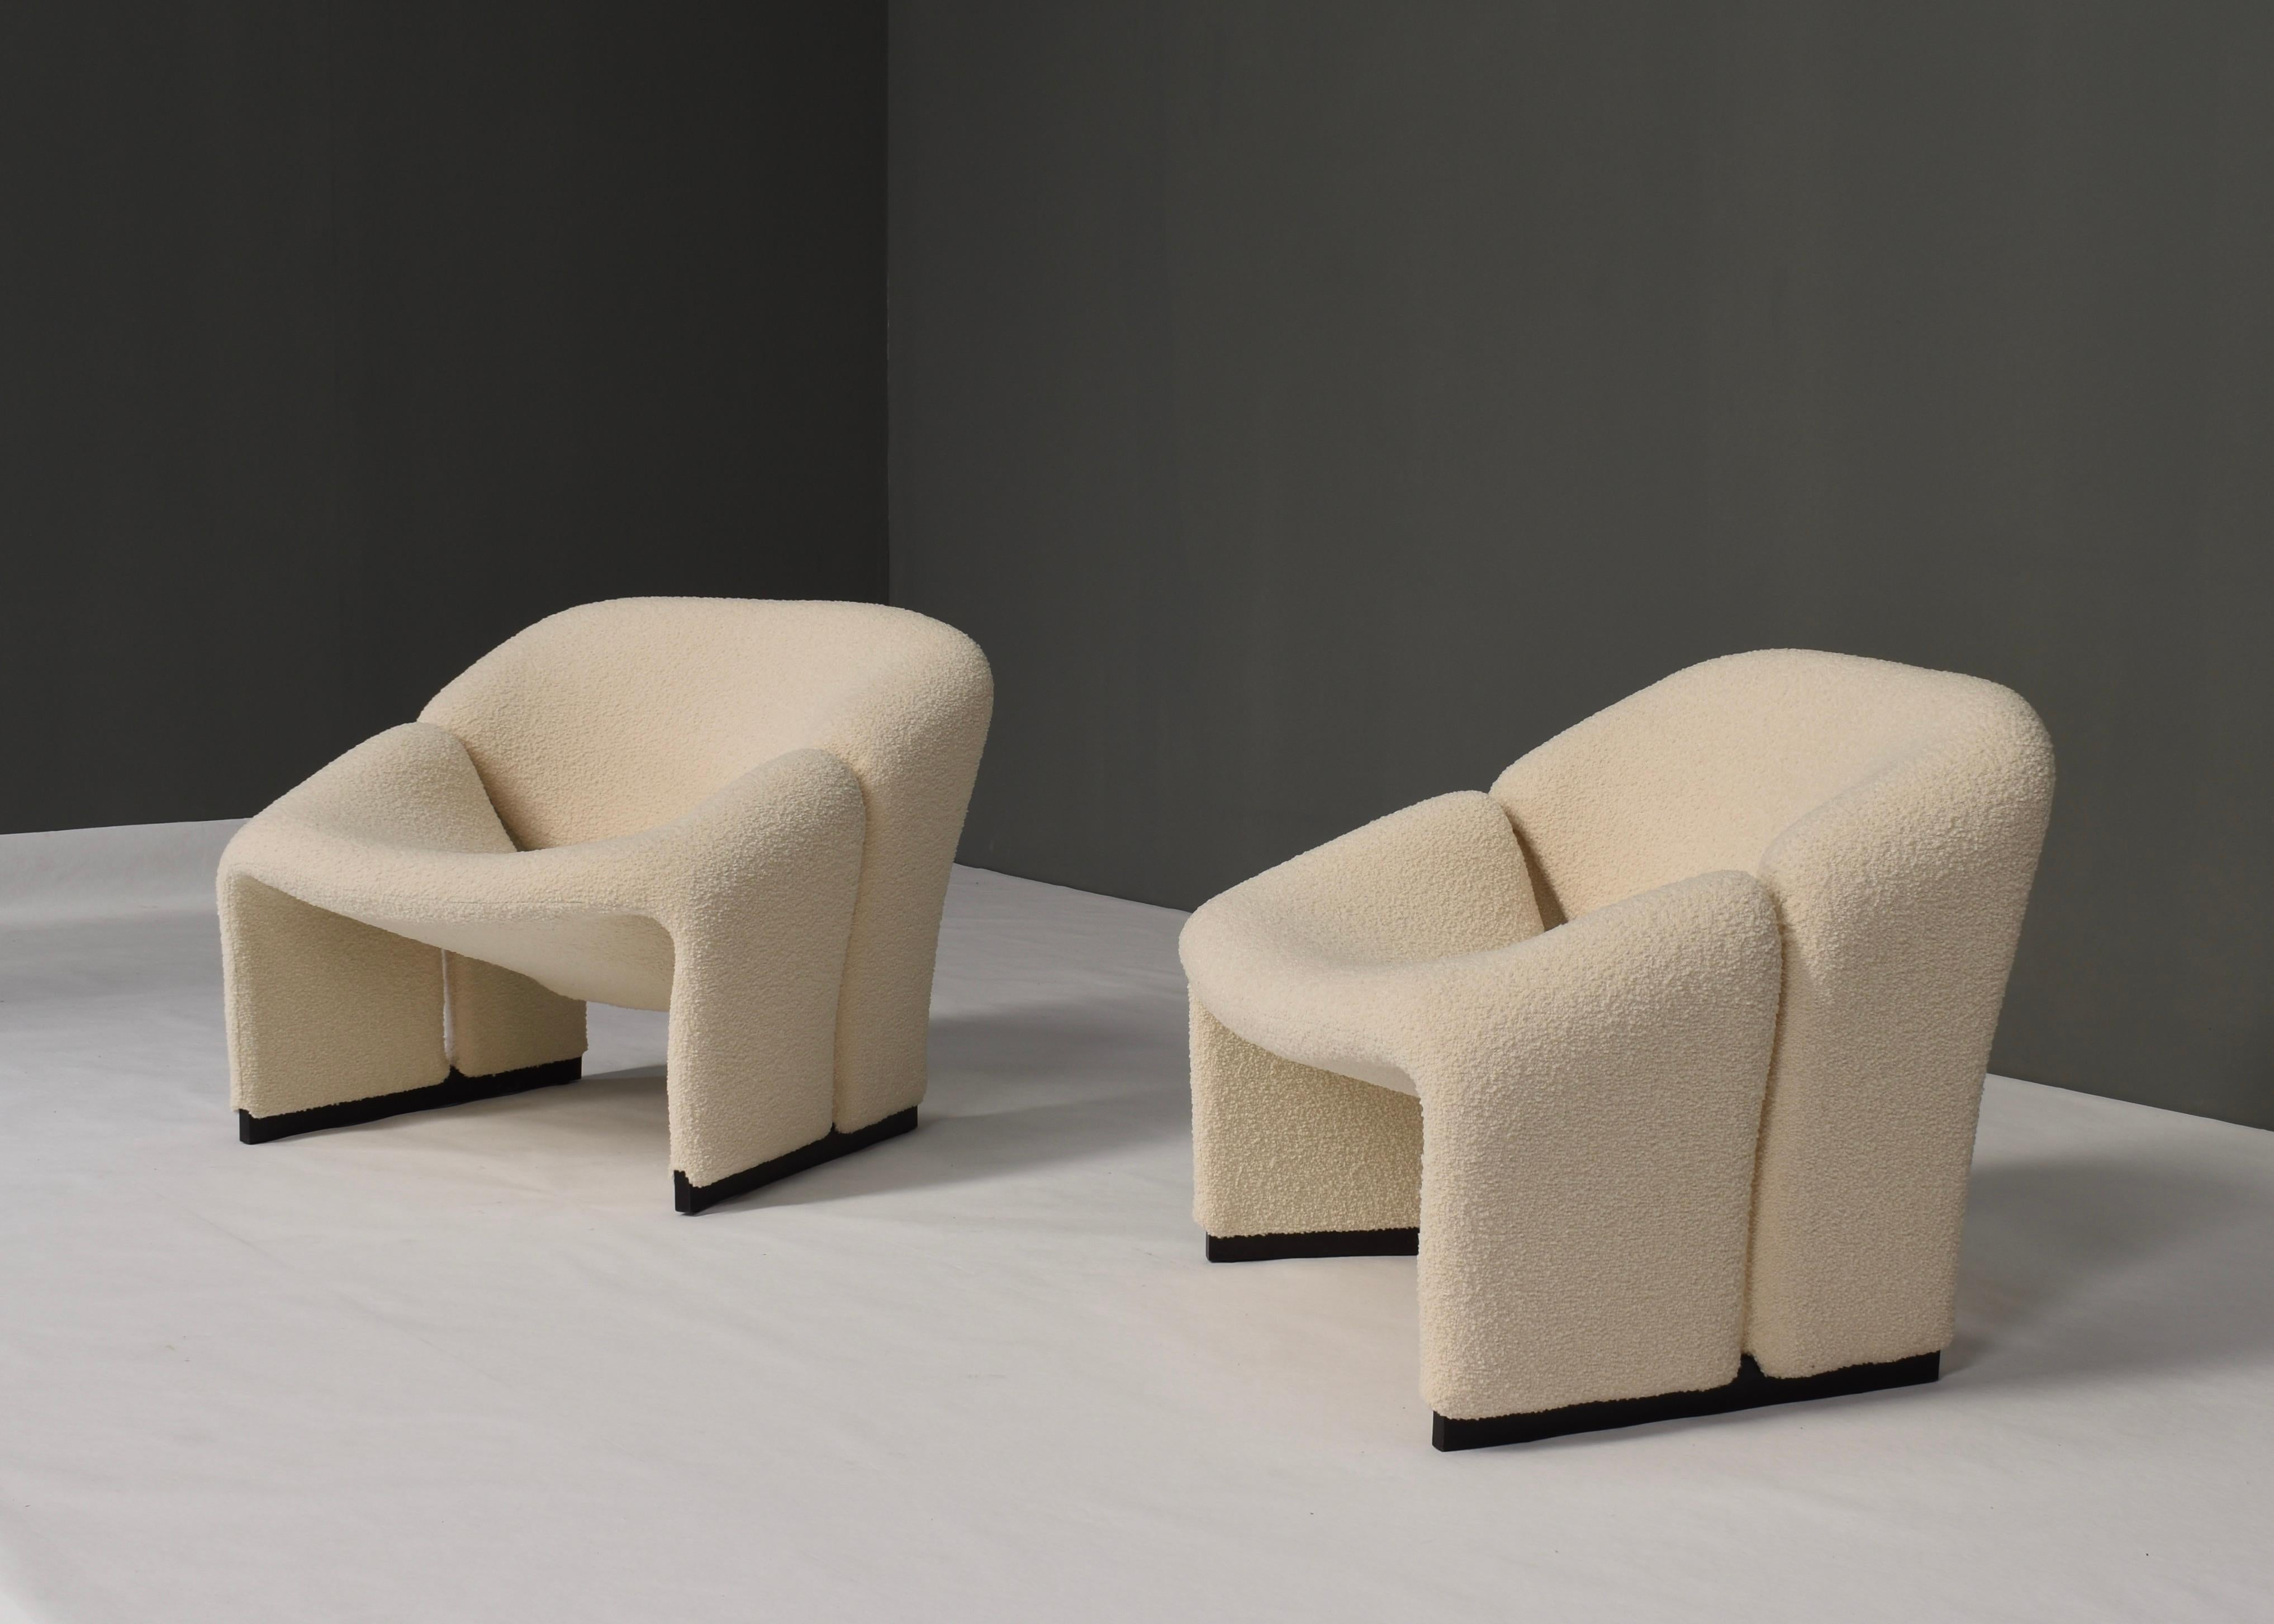 Pair of 1st editionf598 ‘Groovy’ 'M' lounge chairs by Pierre Paulin for Artifort – Netherlands, 1972.

The chairs have been new upholstered in a beautiful off-white bouclé wool fabric from Paris. 
The foam interior also has been replaced, as well